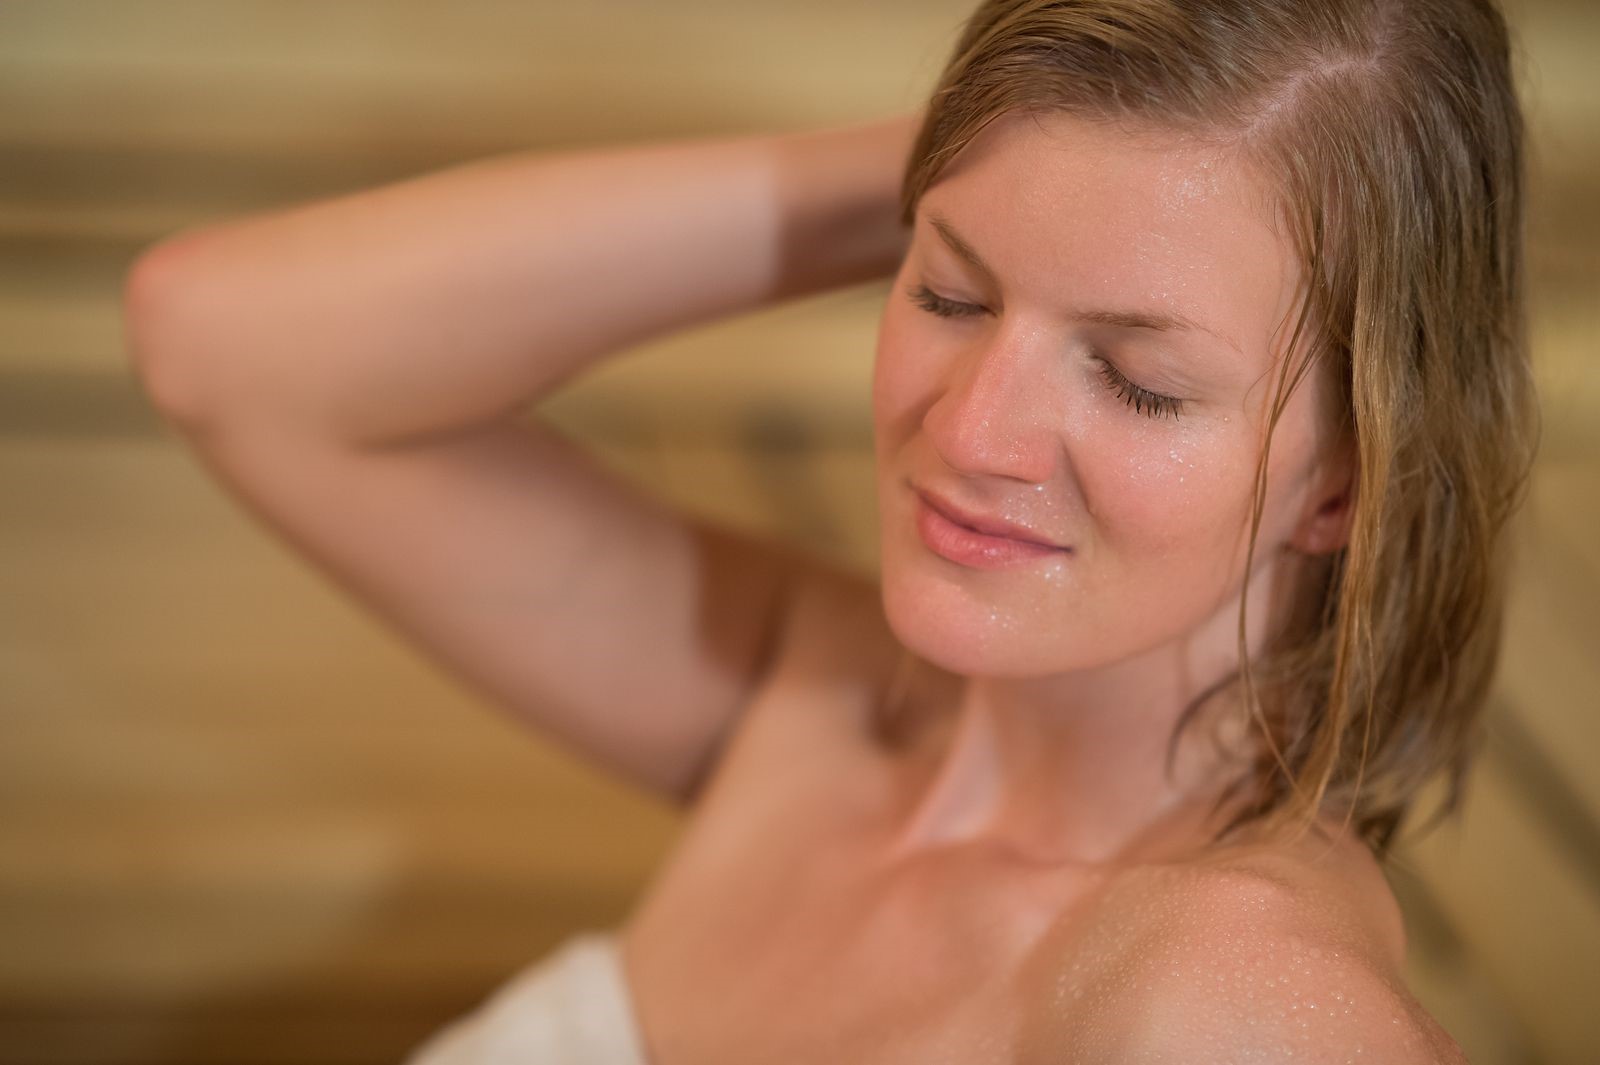 Important Things You Should Know About a Low EMF Far-Infrared Sauna